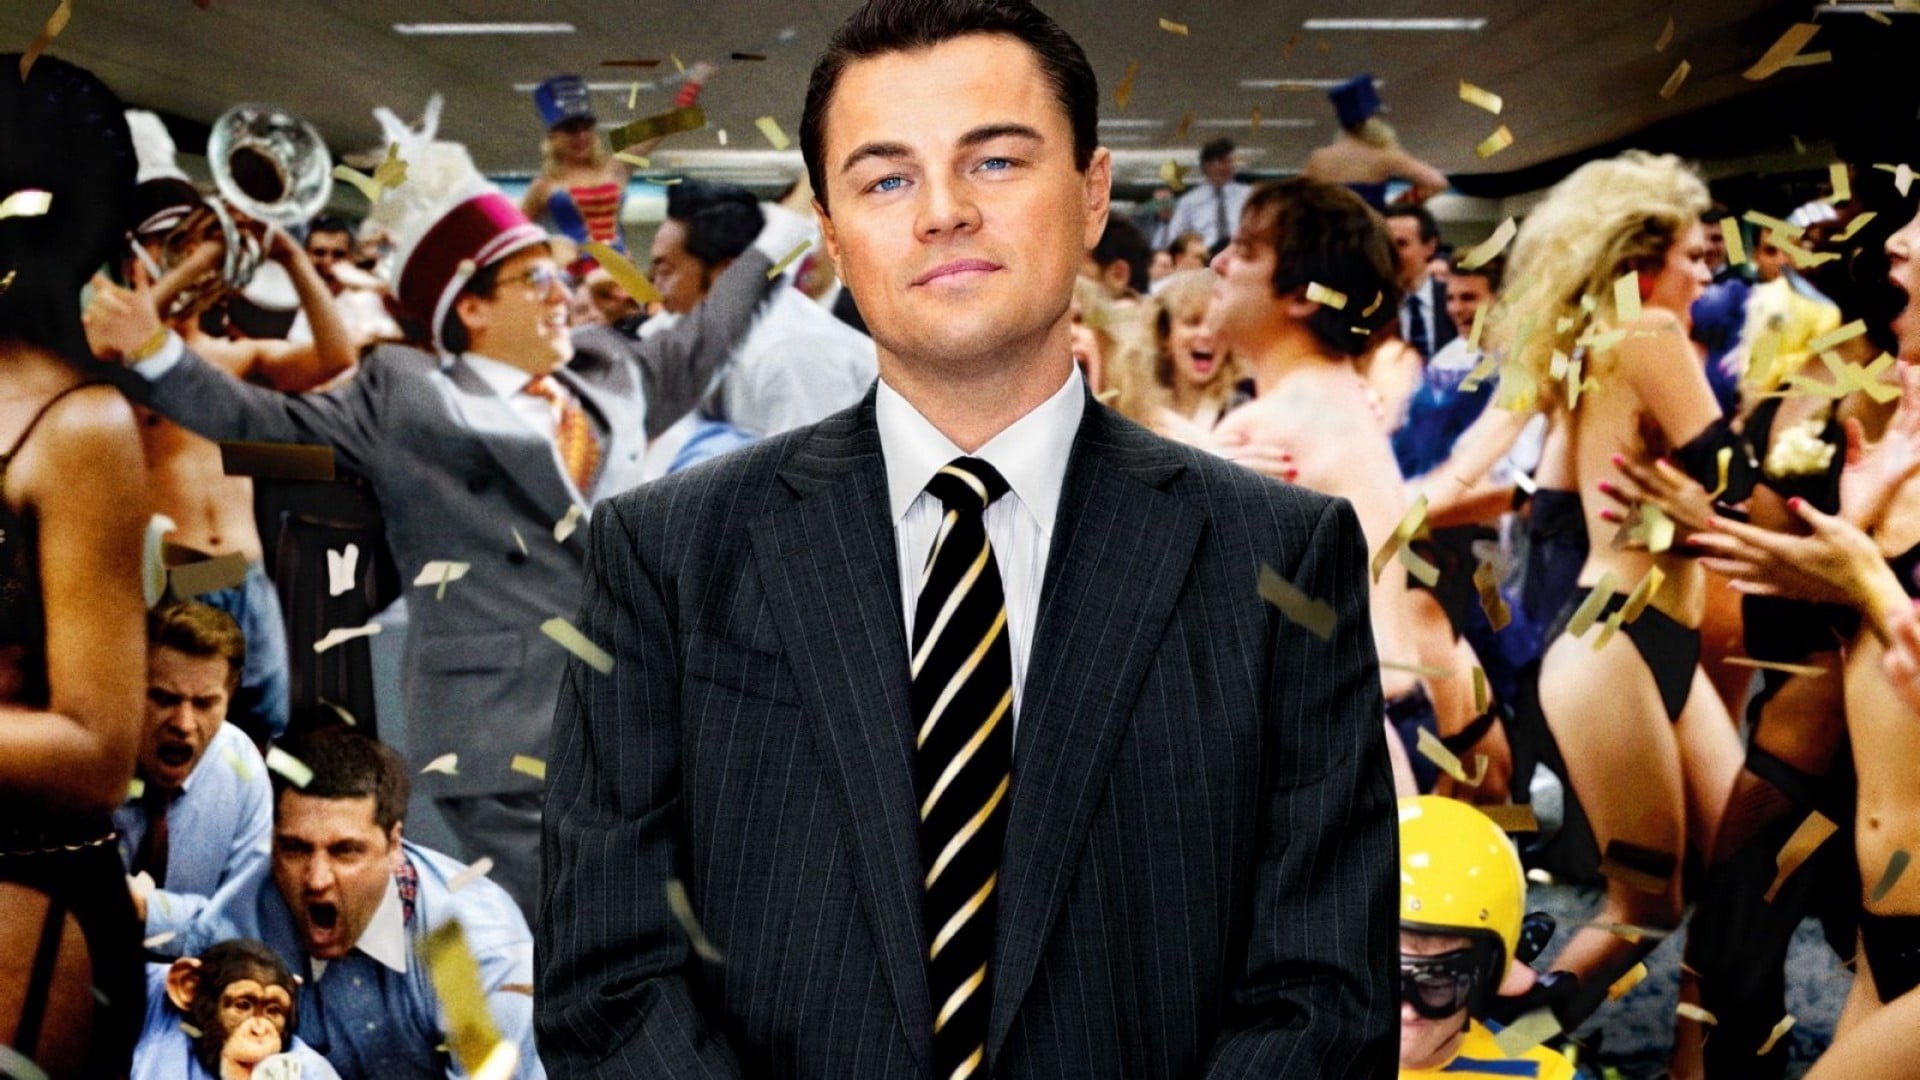 Wallpaper of Leonardo DiCaprio The Wolf of Wall Street for iPad